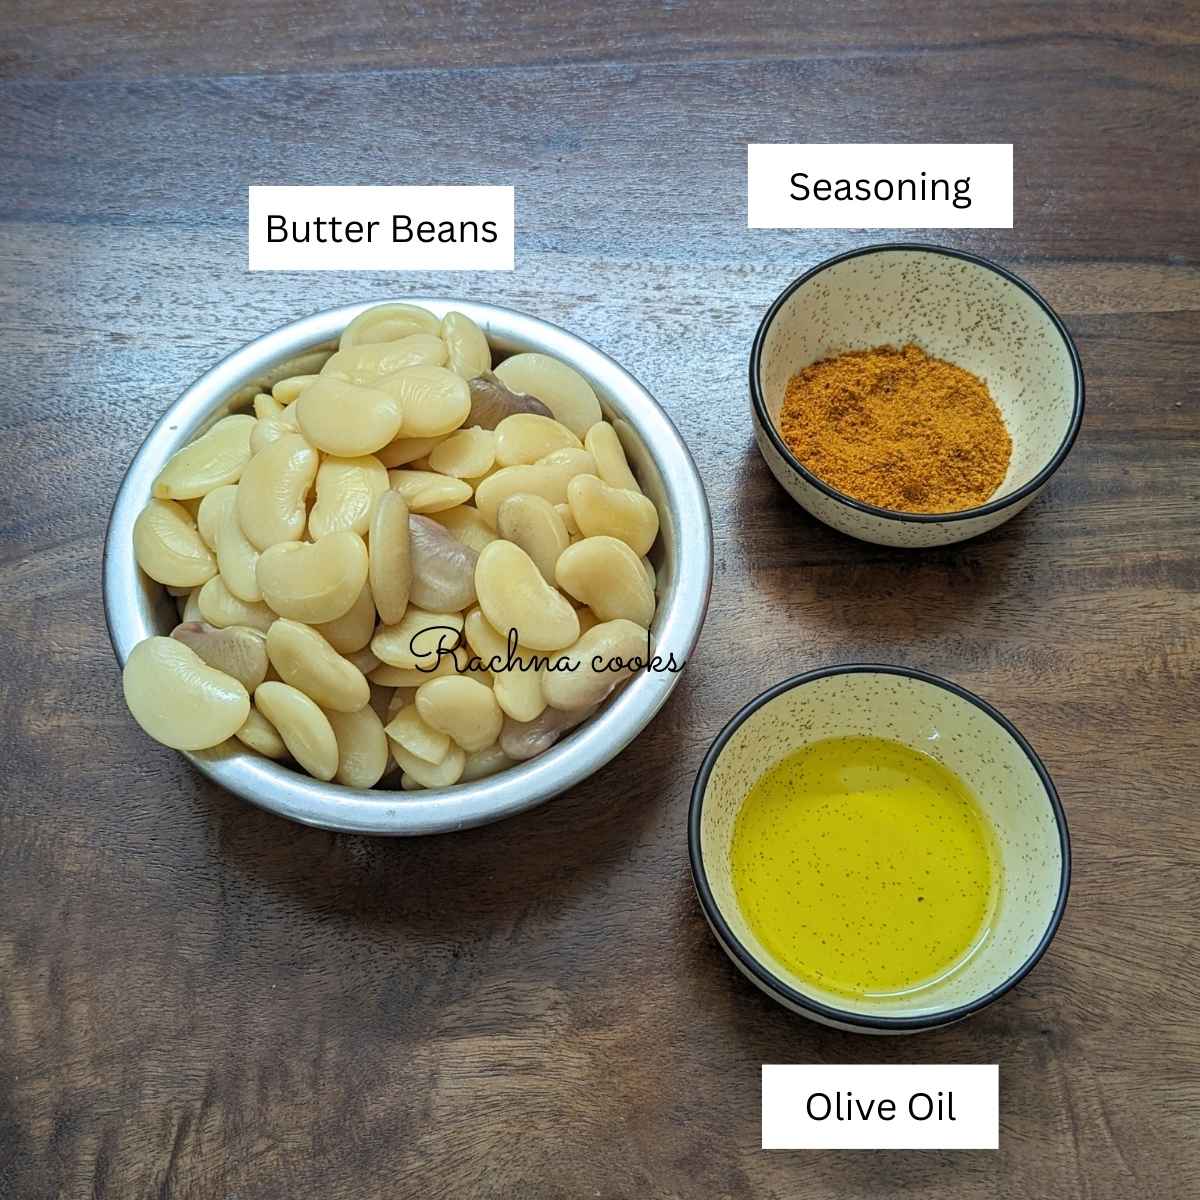 The ingredients for making crispy butter beans.